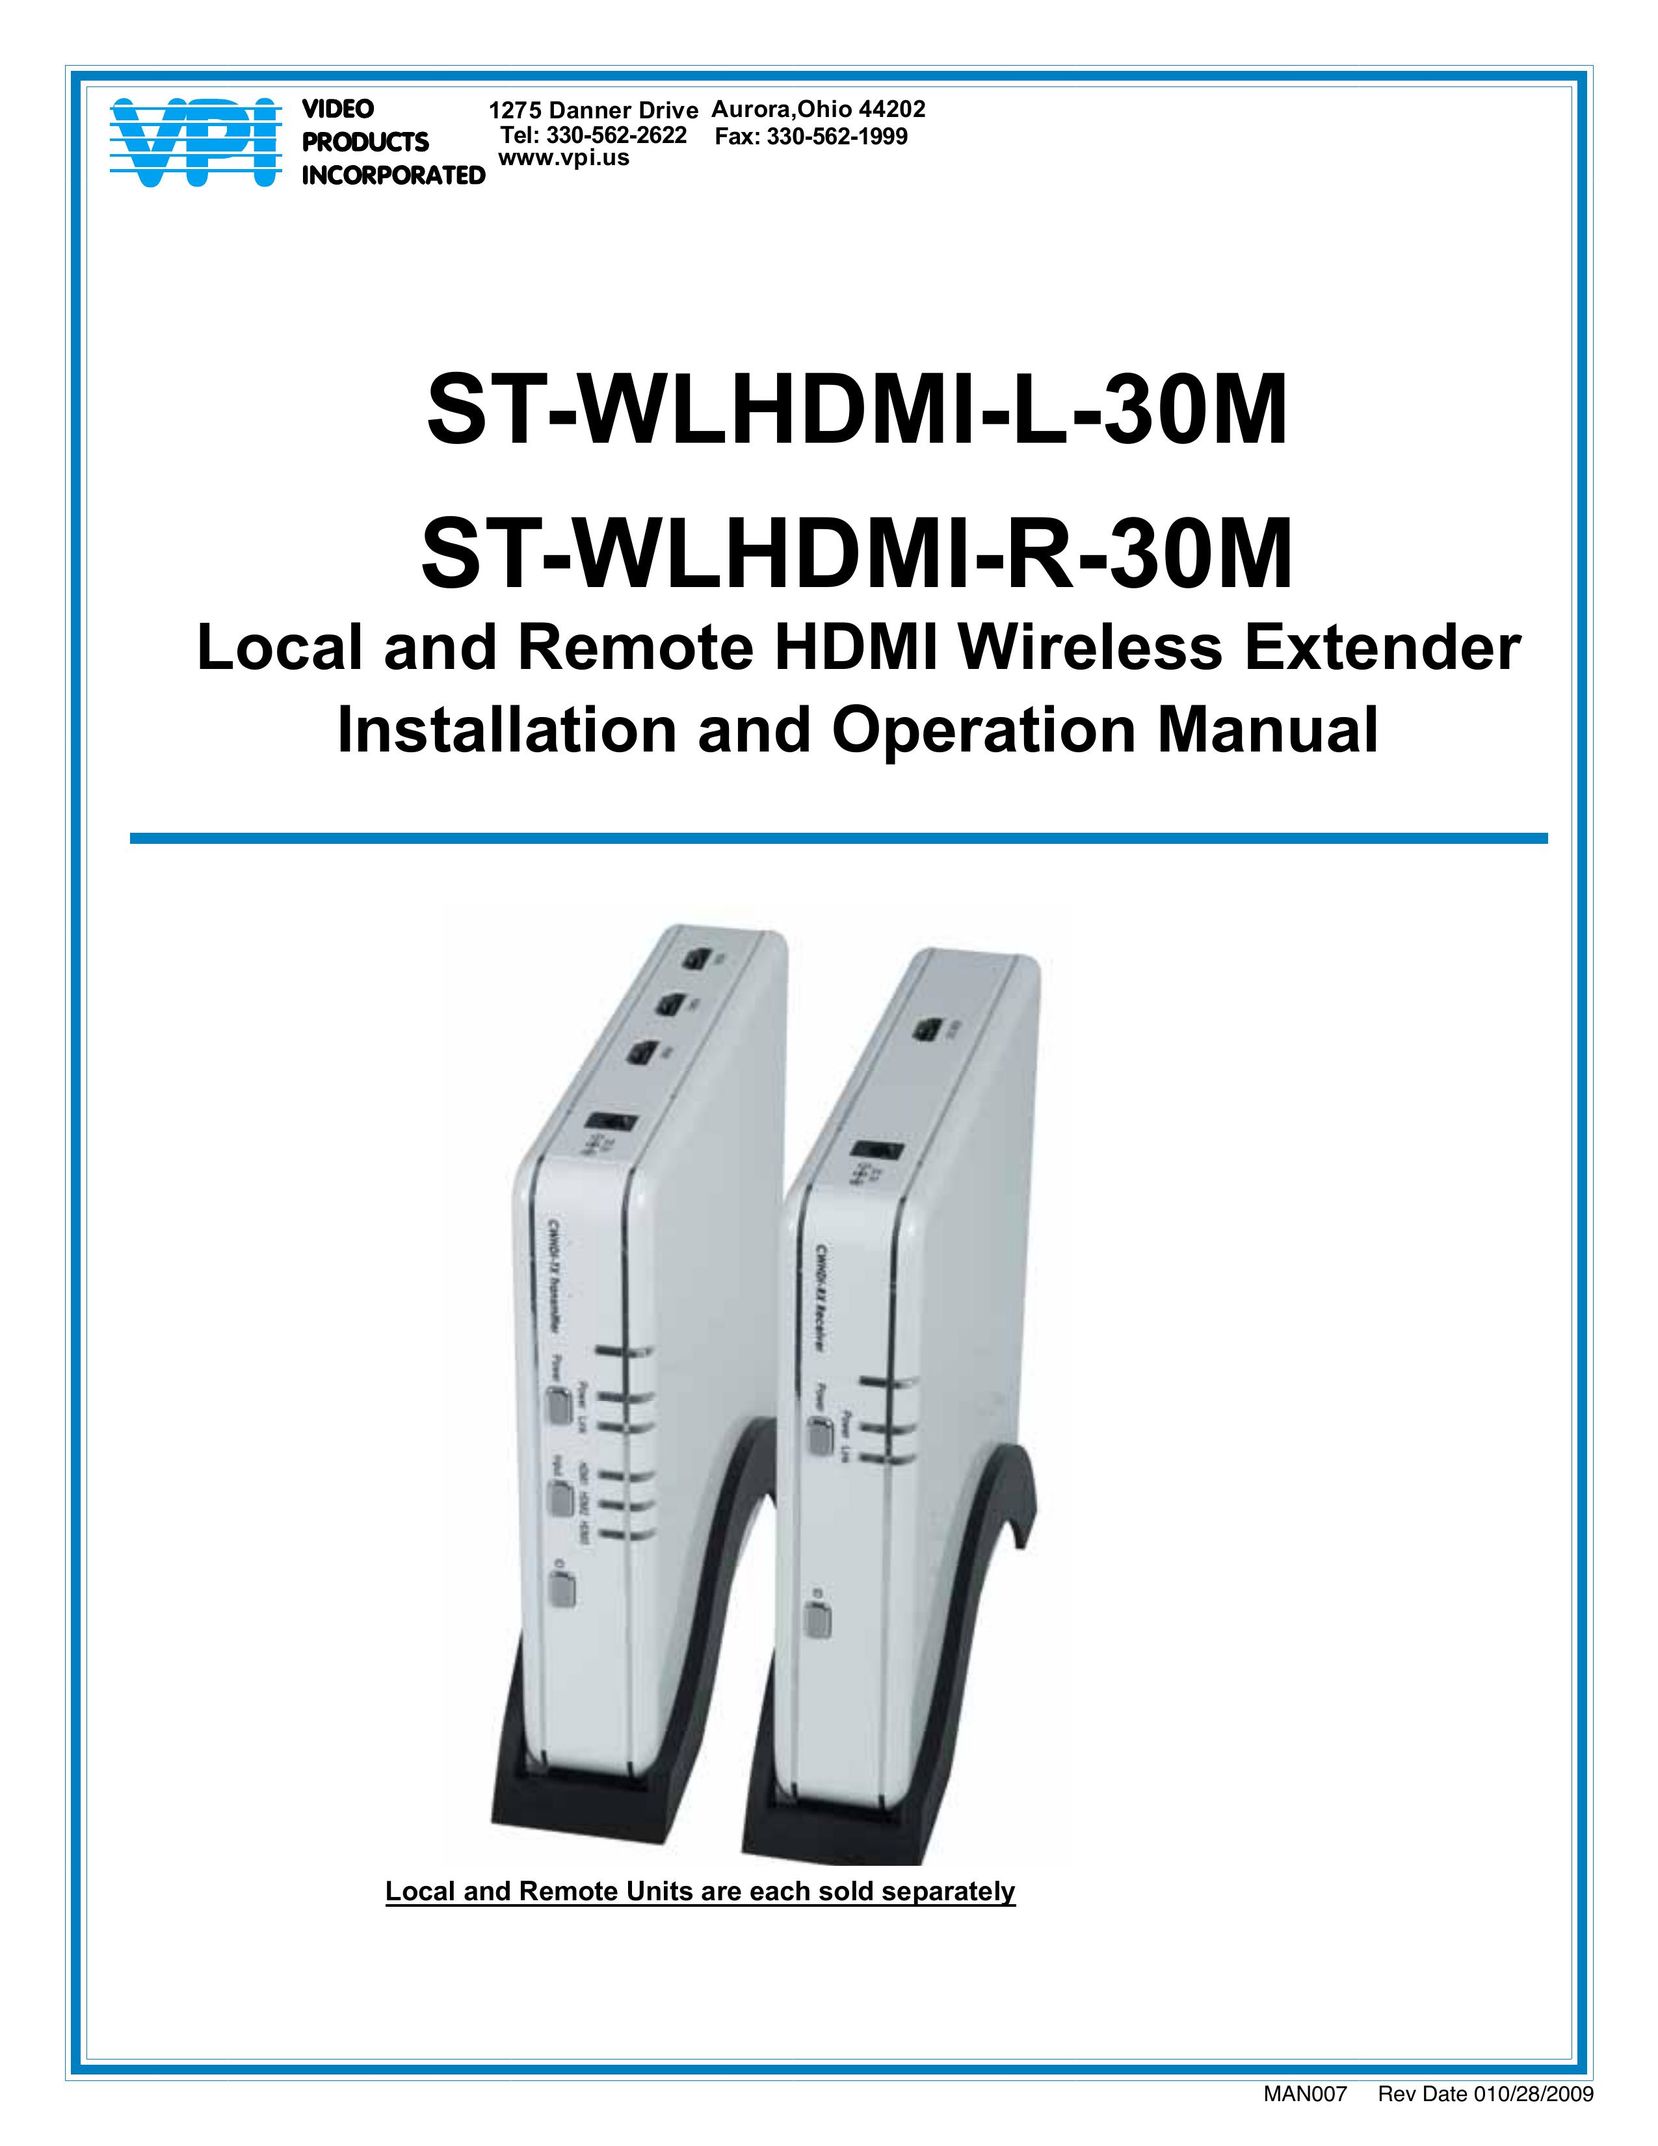 Video Products ST-WLHDMI-R-30M Computer Hardware User Manual